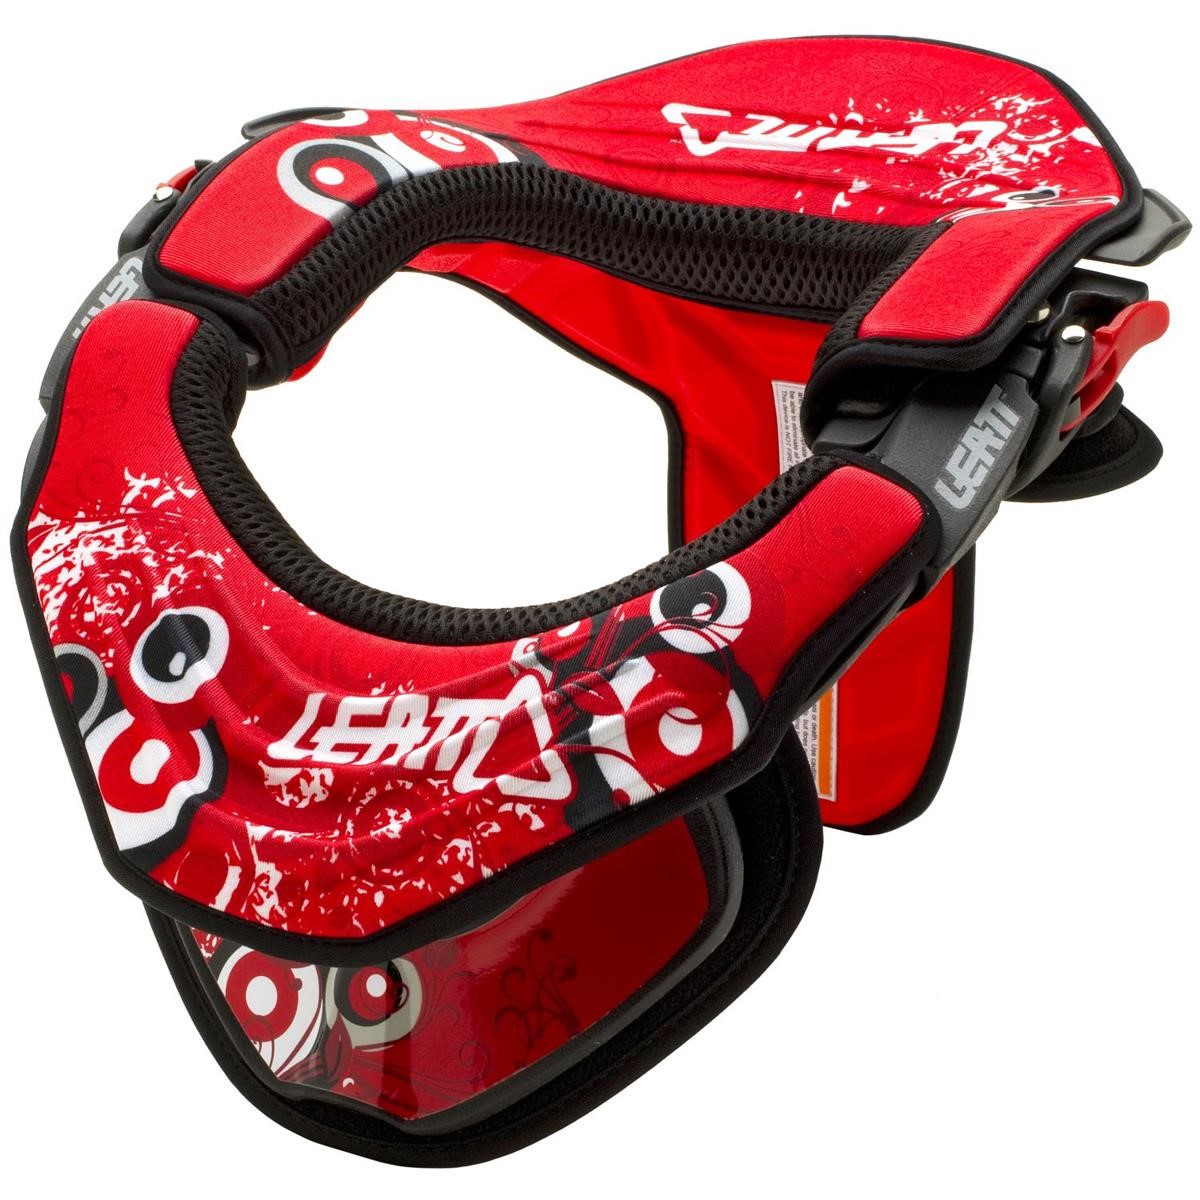 Leatt Replacement Padding and Sticker Kit GPX Ashley Fiolek Red